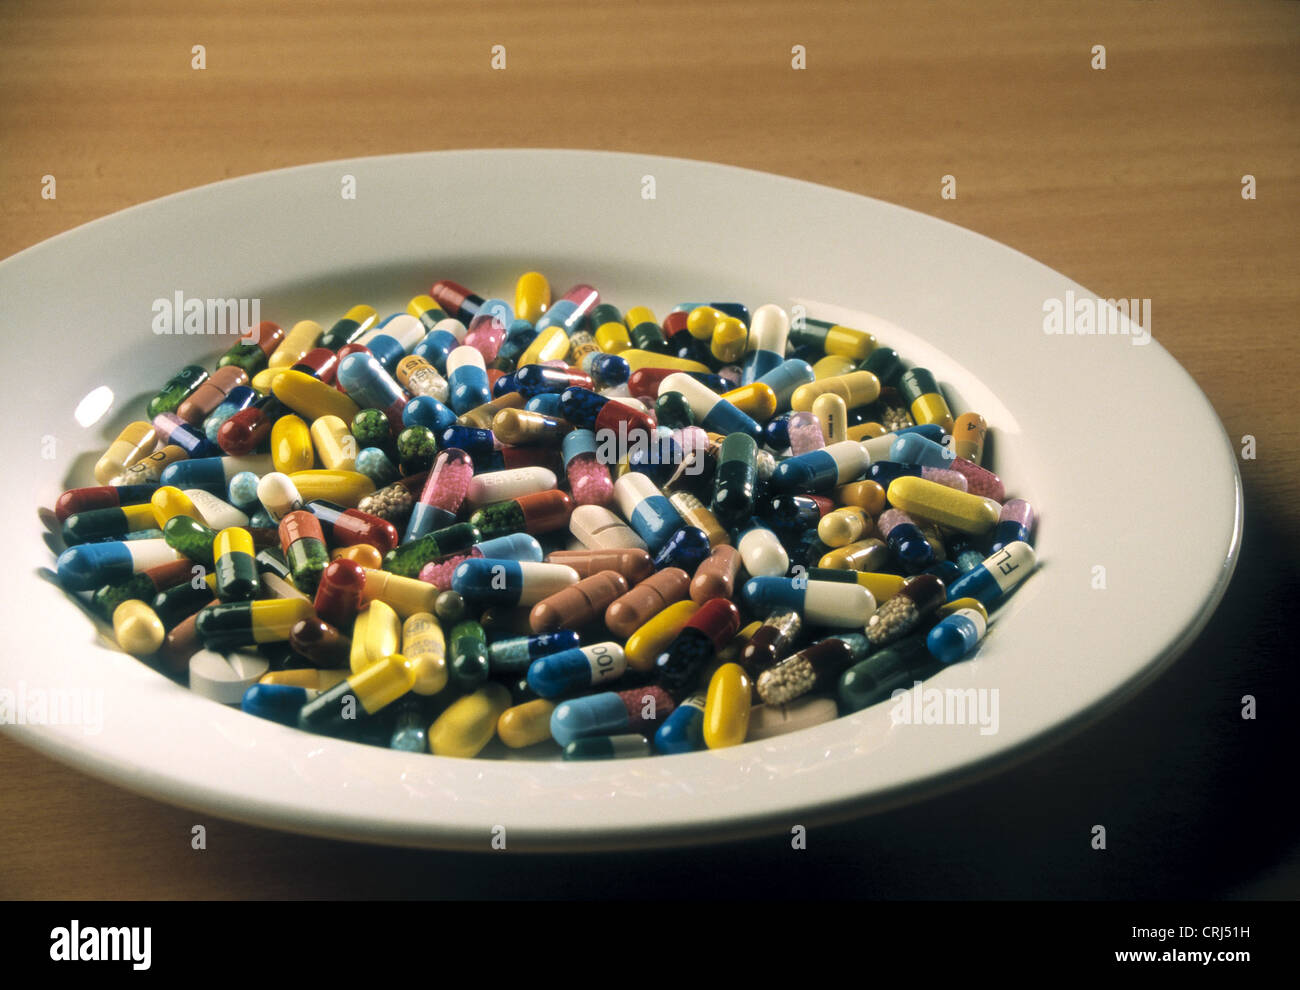 A plate full of tablets and capsules in a variety of colors and sizes Stock Photo